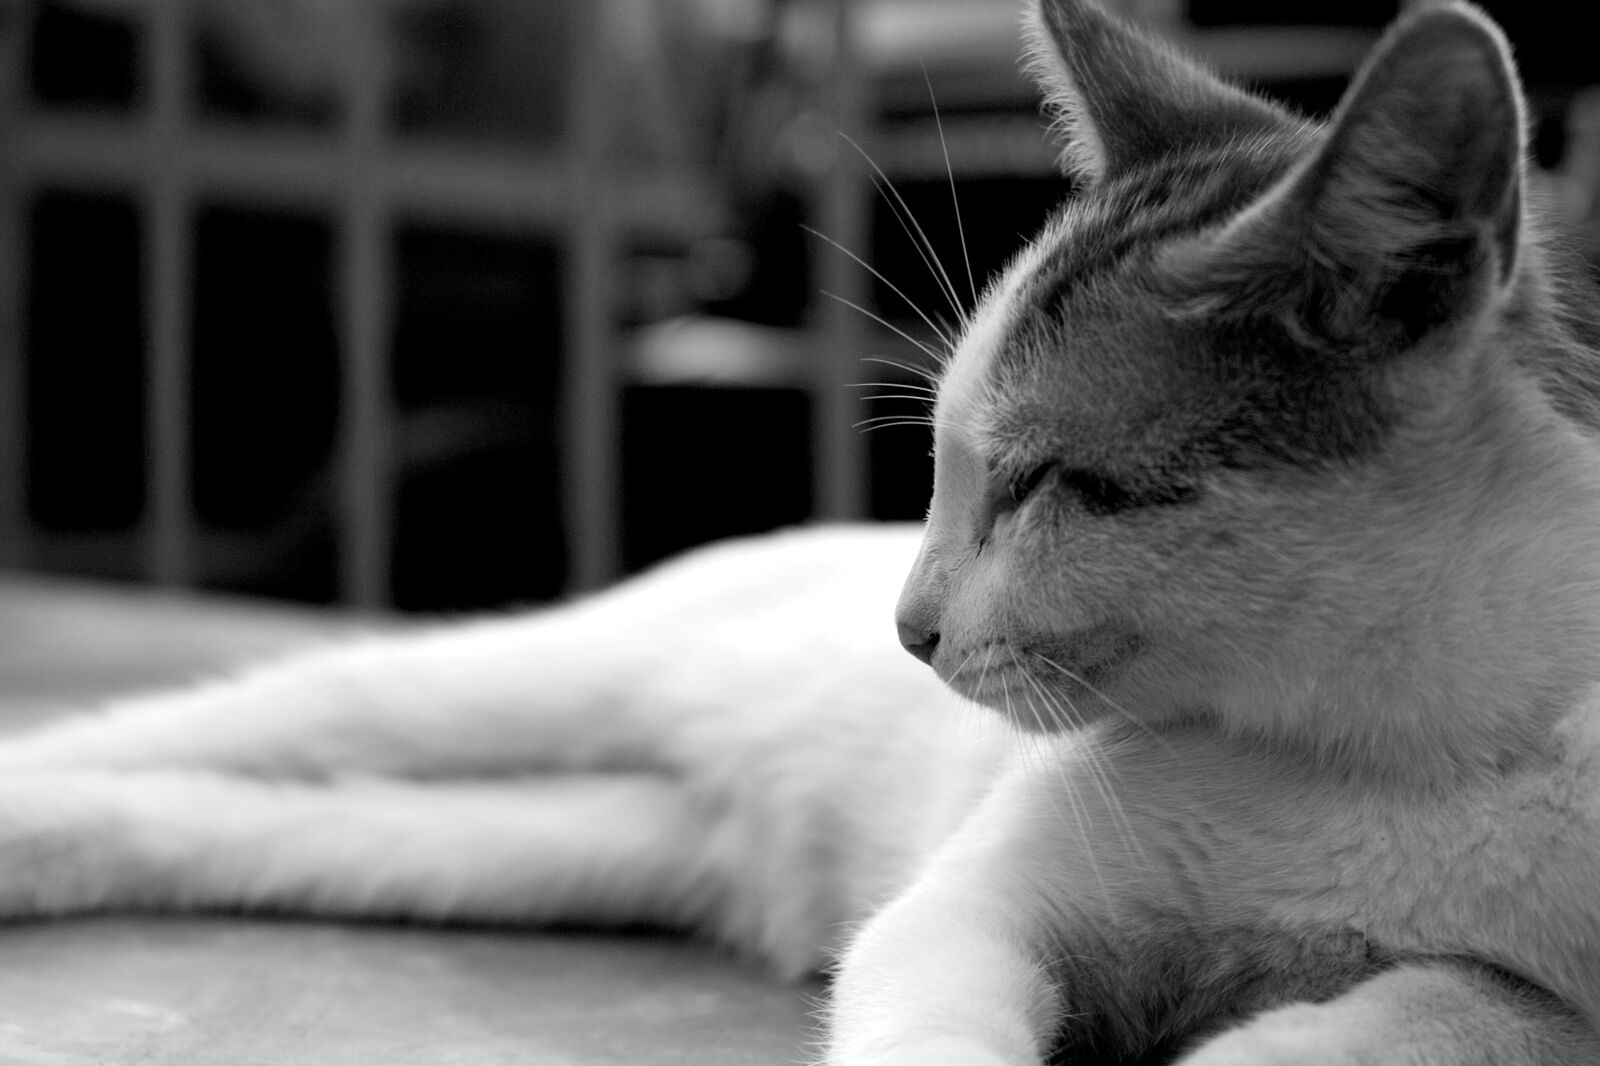 Sigma DP2 Merrill sample photo. Cat, black and white photography